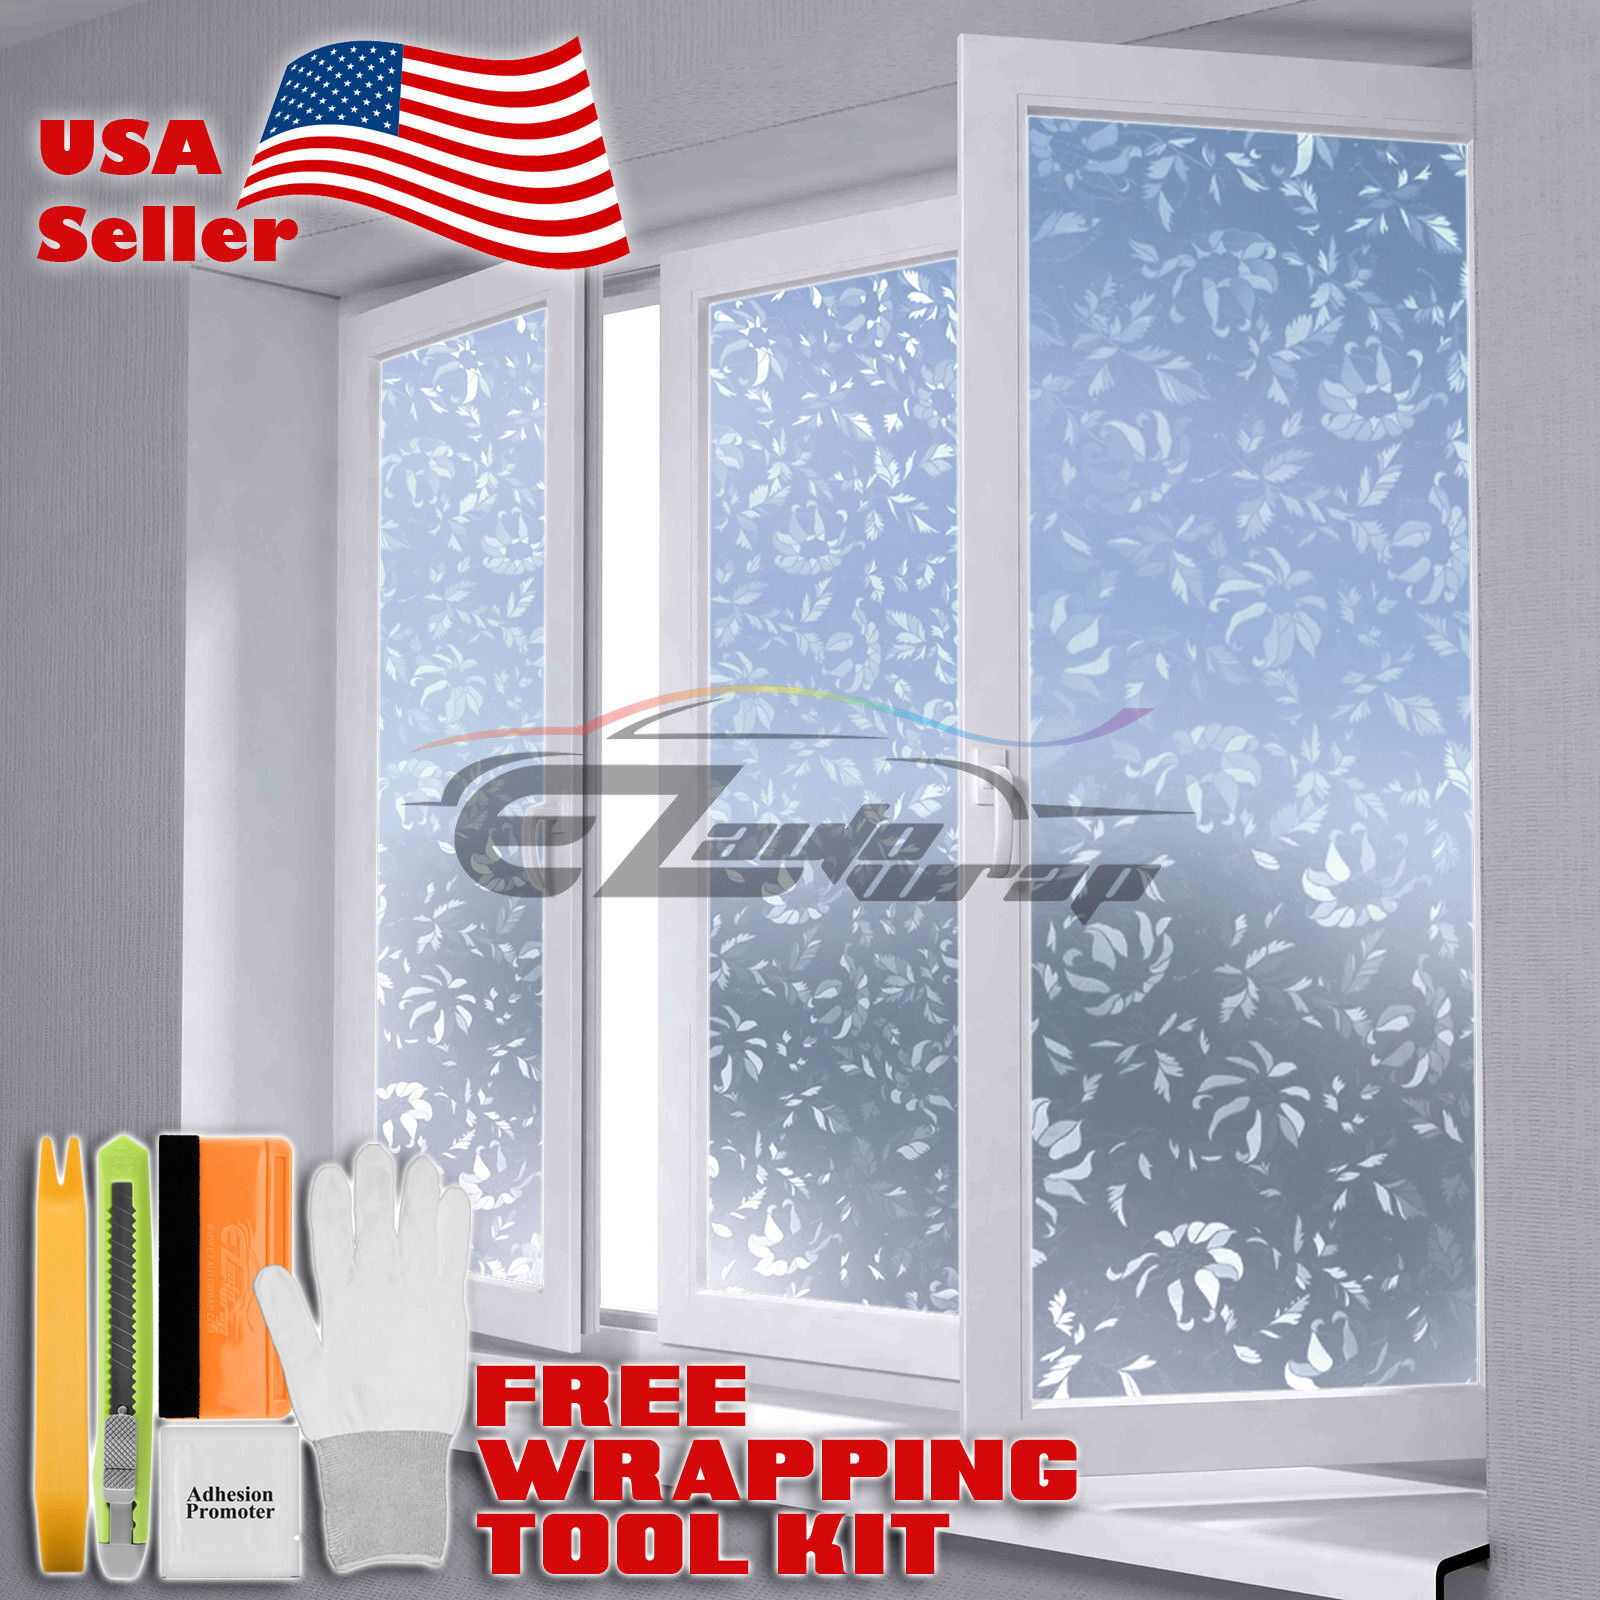 【Frosted Film】 Glass Home Bathroom Window Security Privacy Sticker #4001